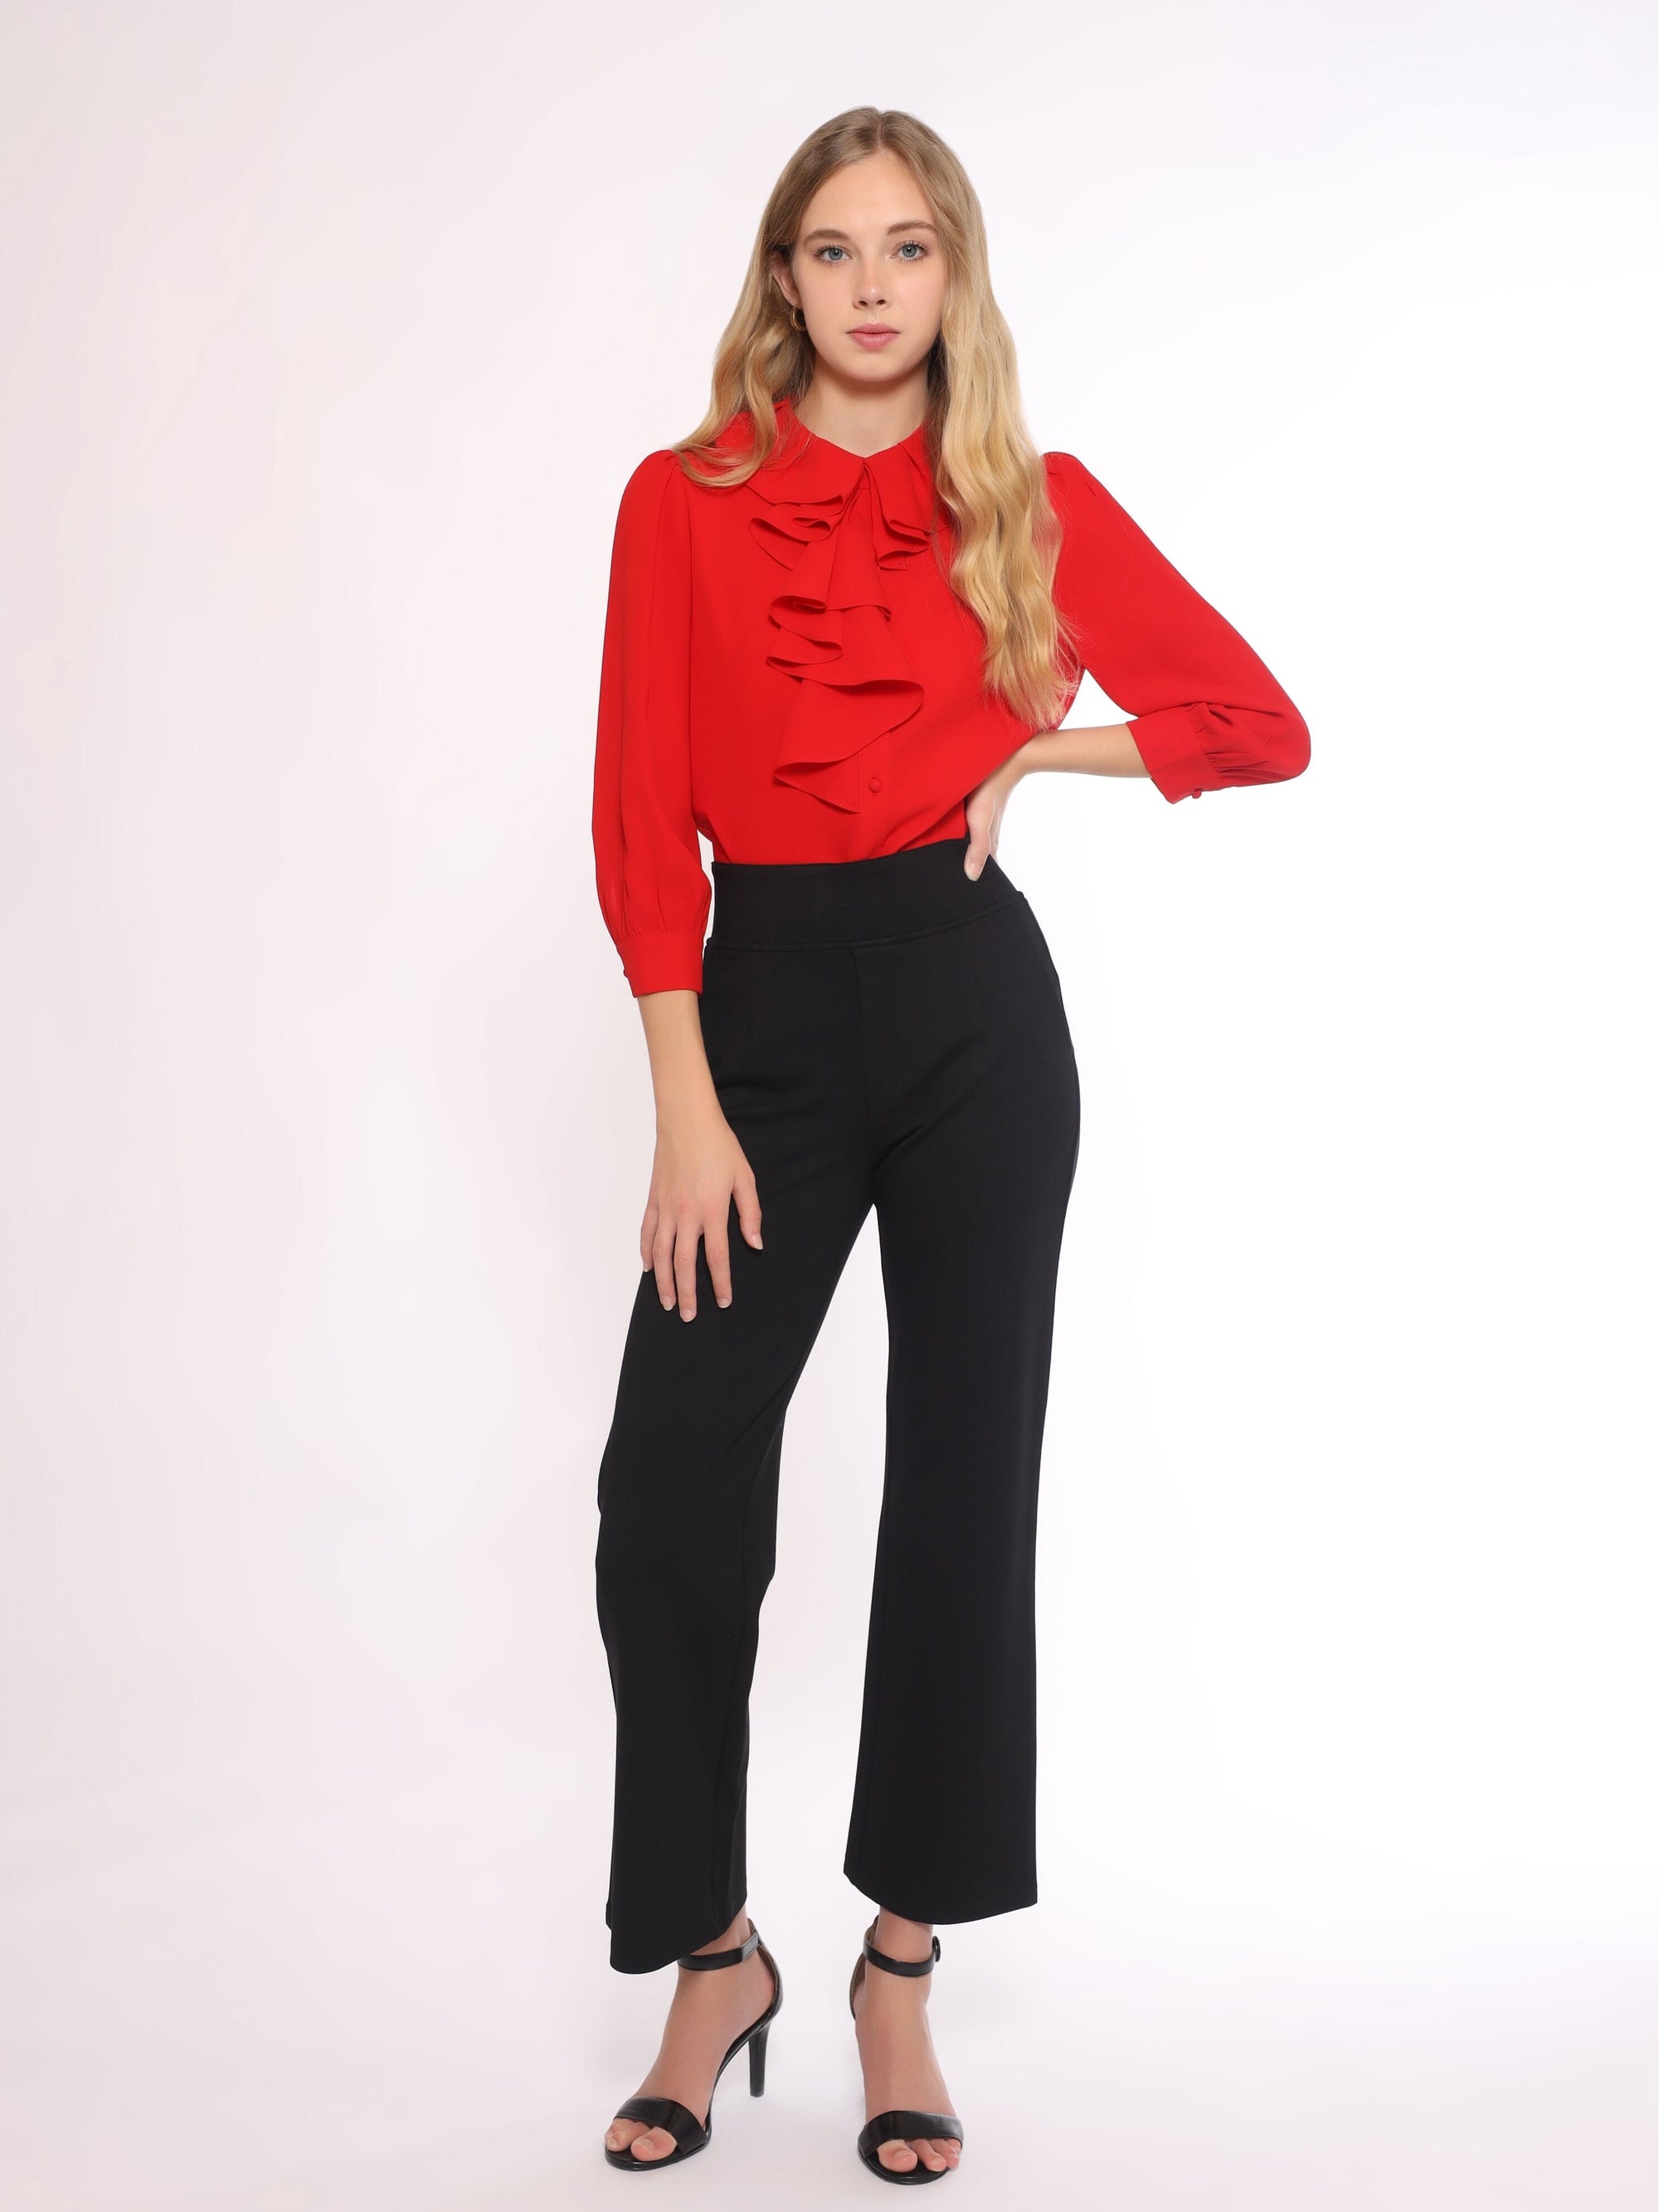 Flare Collar Quarter Length Sleeve Blouse TOP Gracia Fashion RED S 